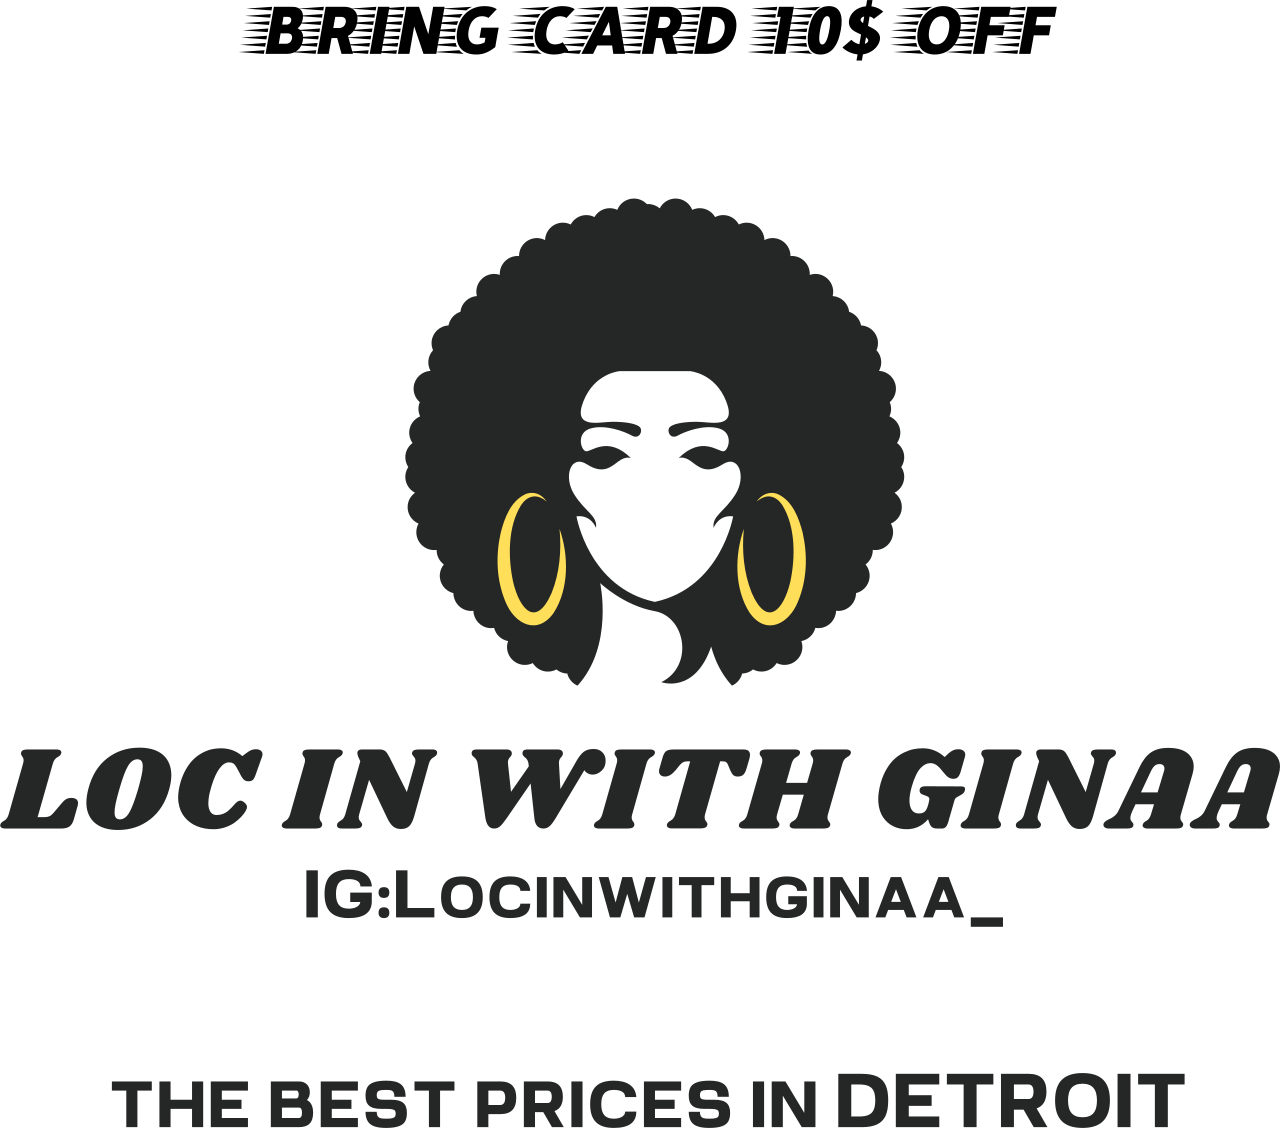 Loc In With Ginaa 's logo